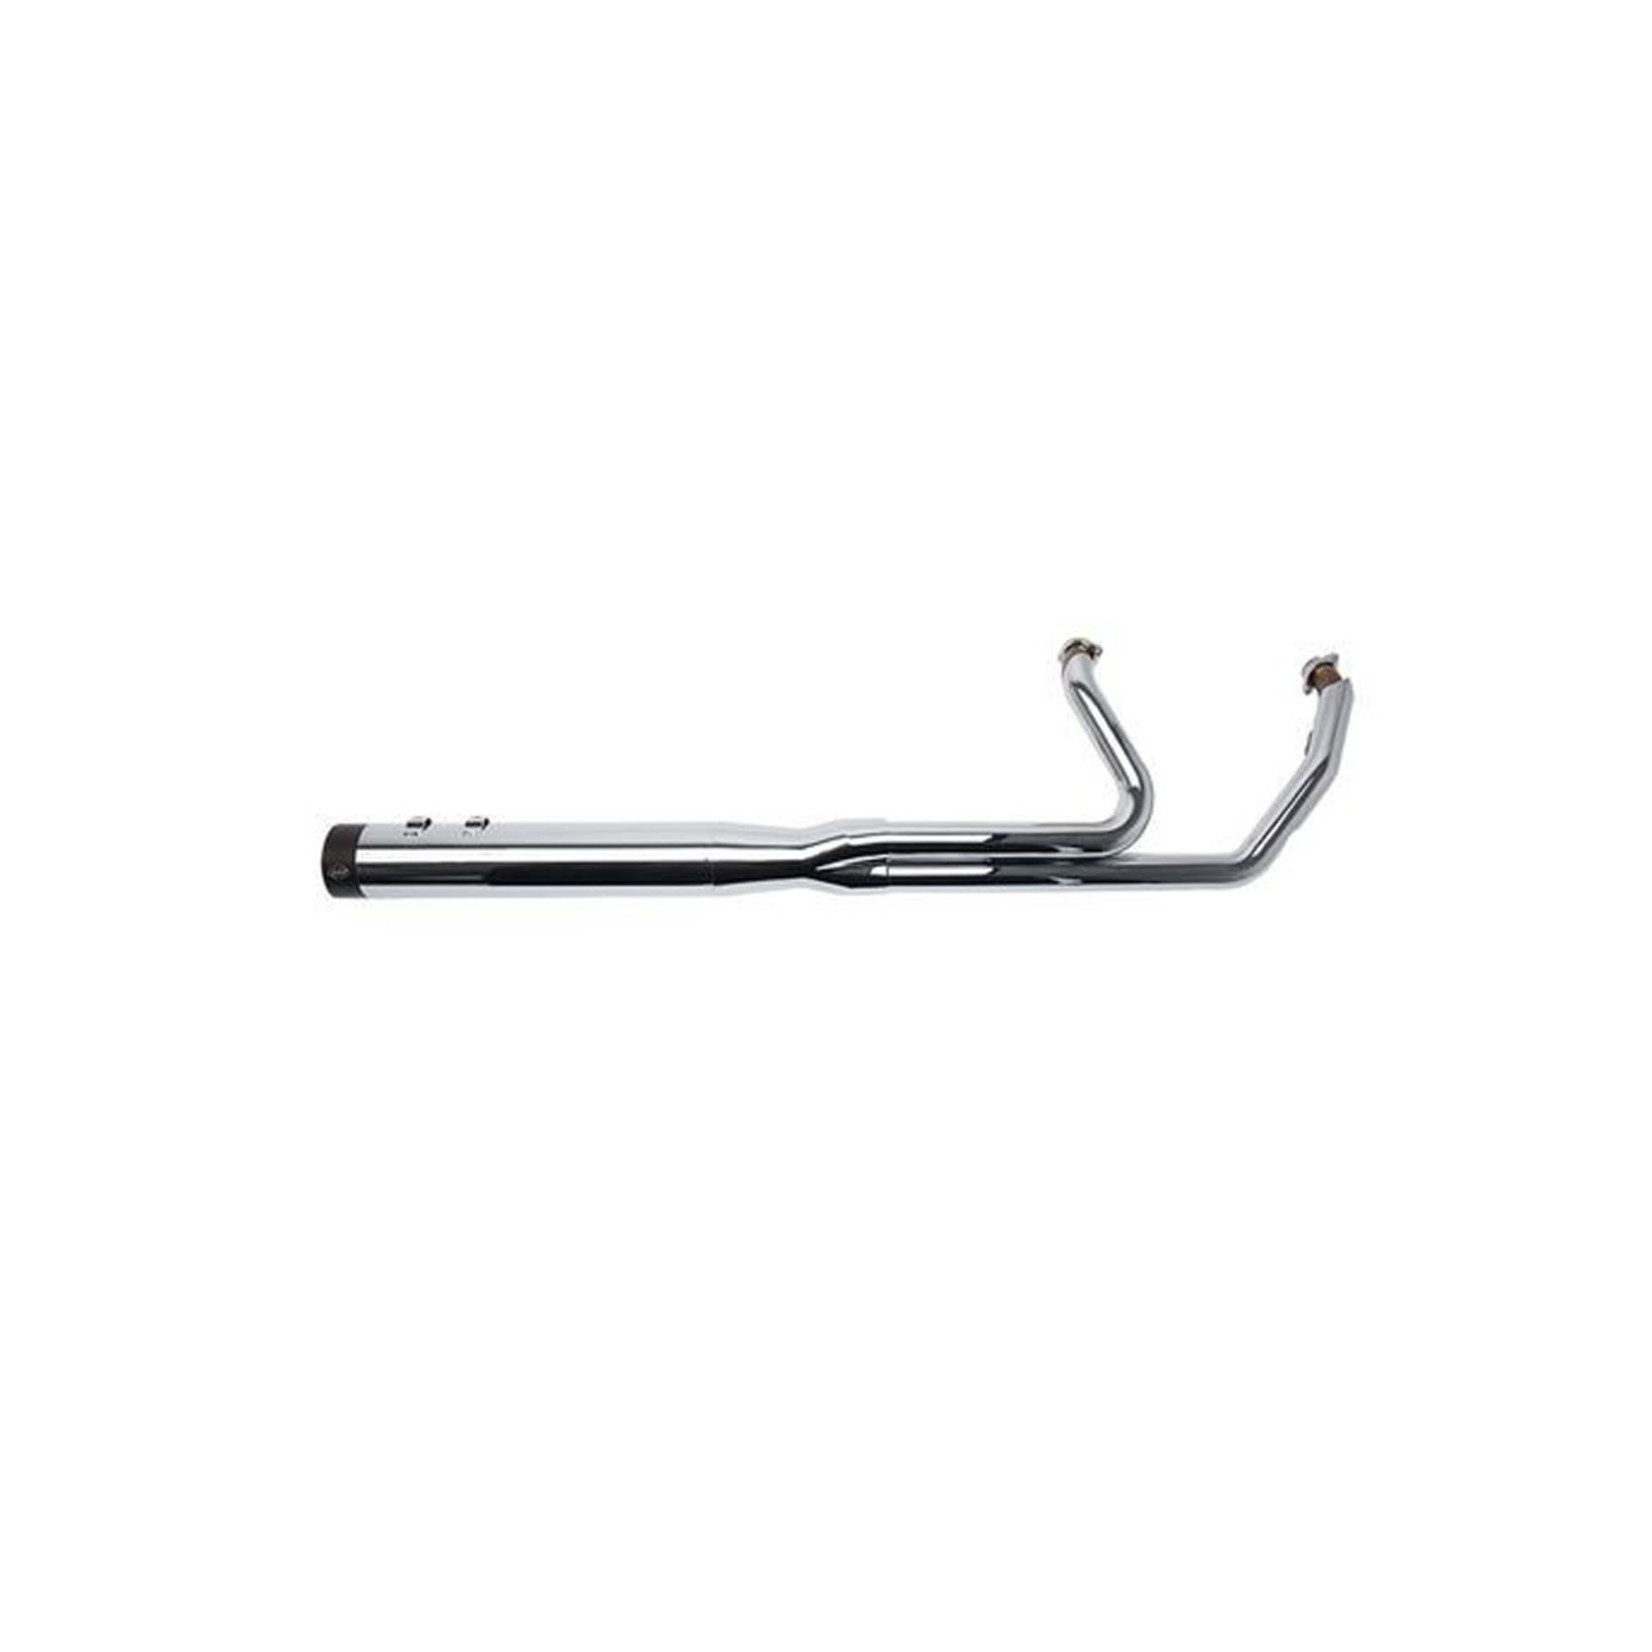 S&S CYCLE S&S CYCLE 50 STATE 2:1 SIDEWINDER EXHAUST SYSTEM - CHROME